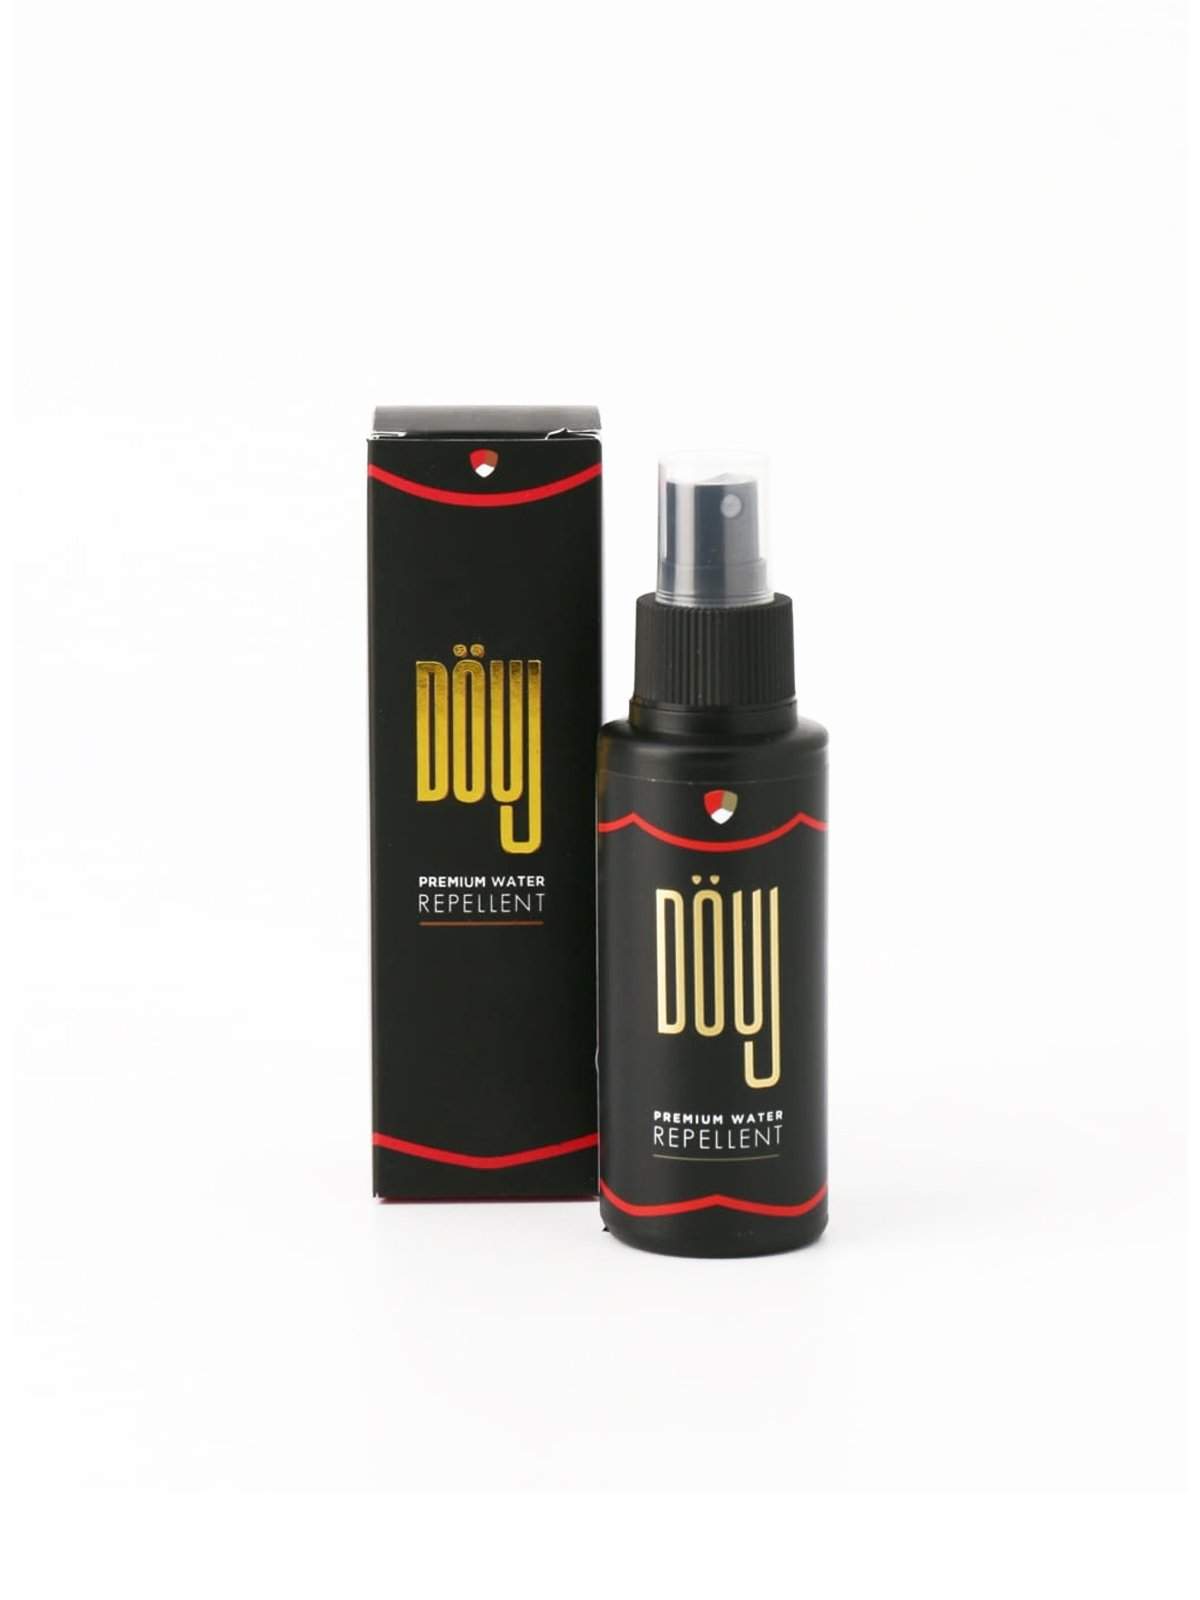 Douj Protect Water Repellent Pump Spray 60ml - MORE by Morello Indonesia